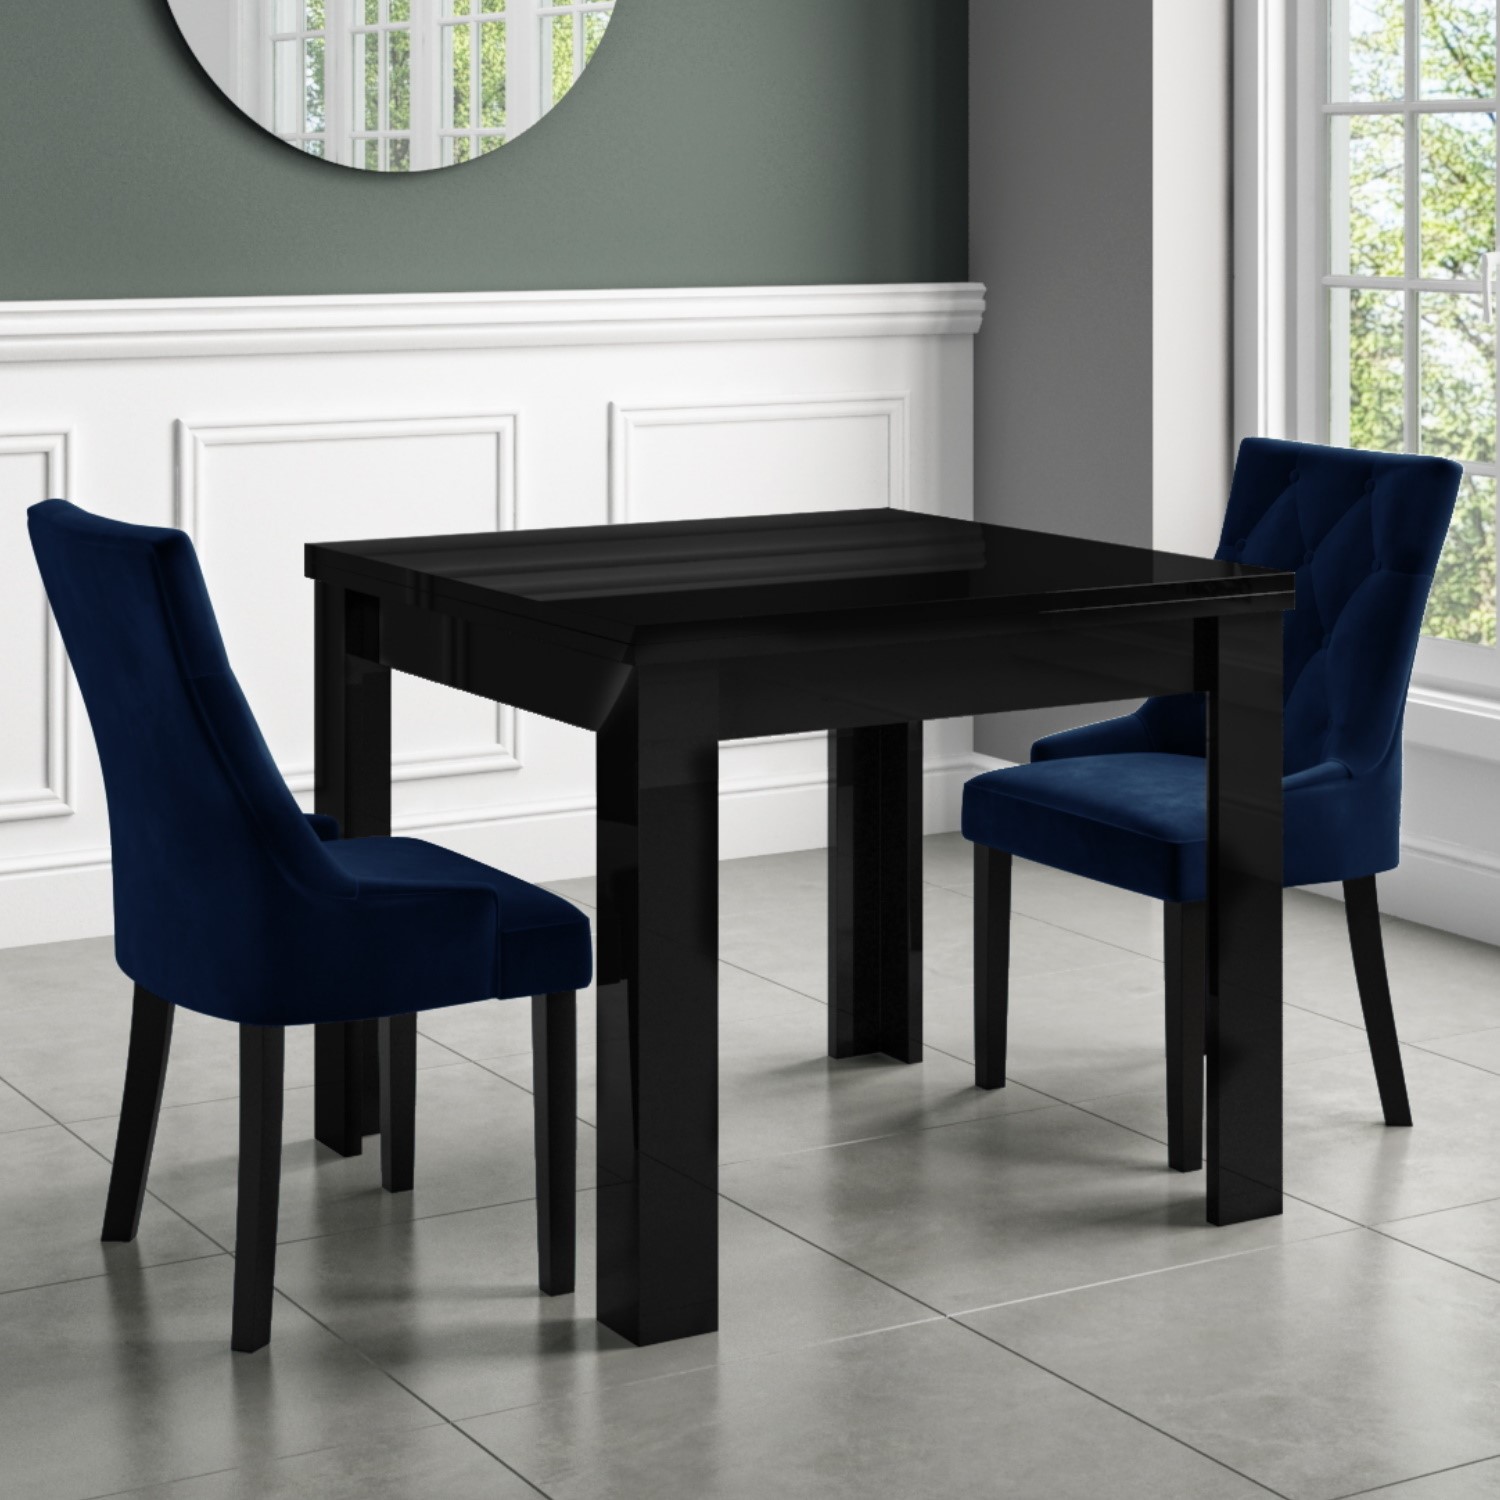 Navy Blue Dining Room Table And Chairs : 18 Gray Dining Room Design